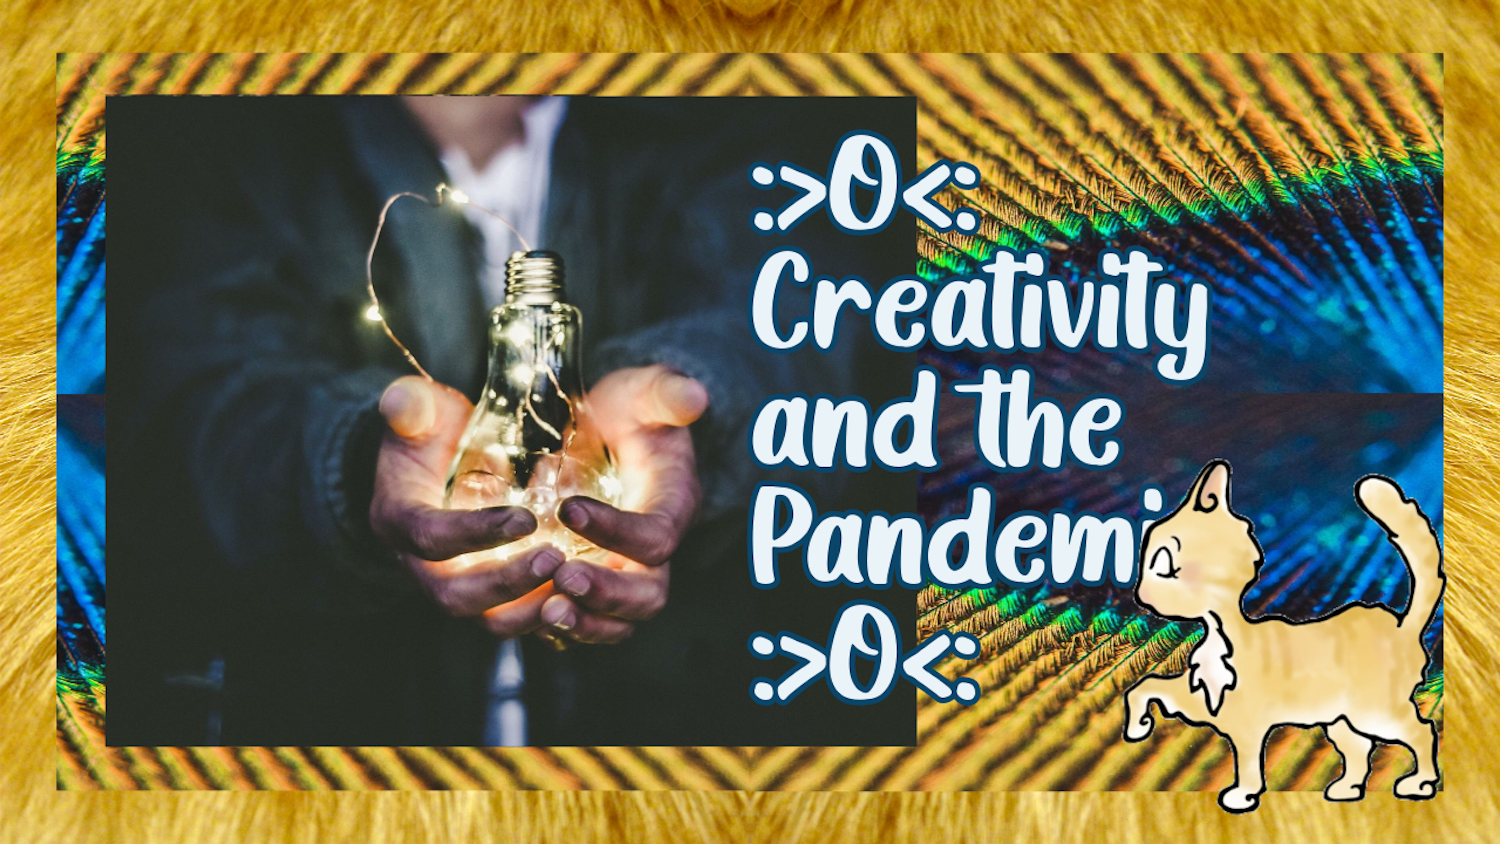 Creativity and the Pandemic